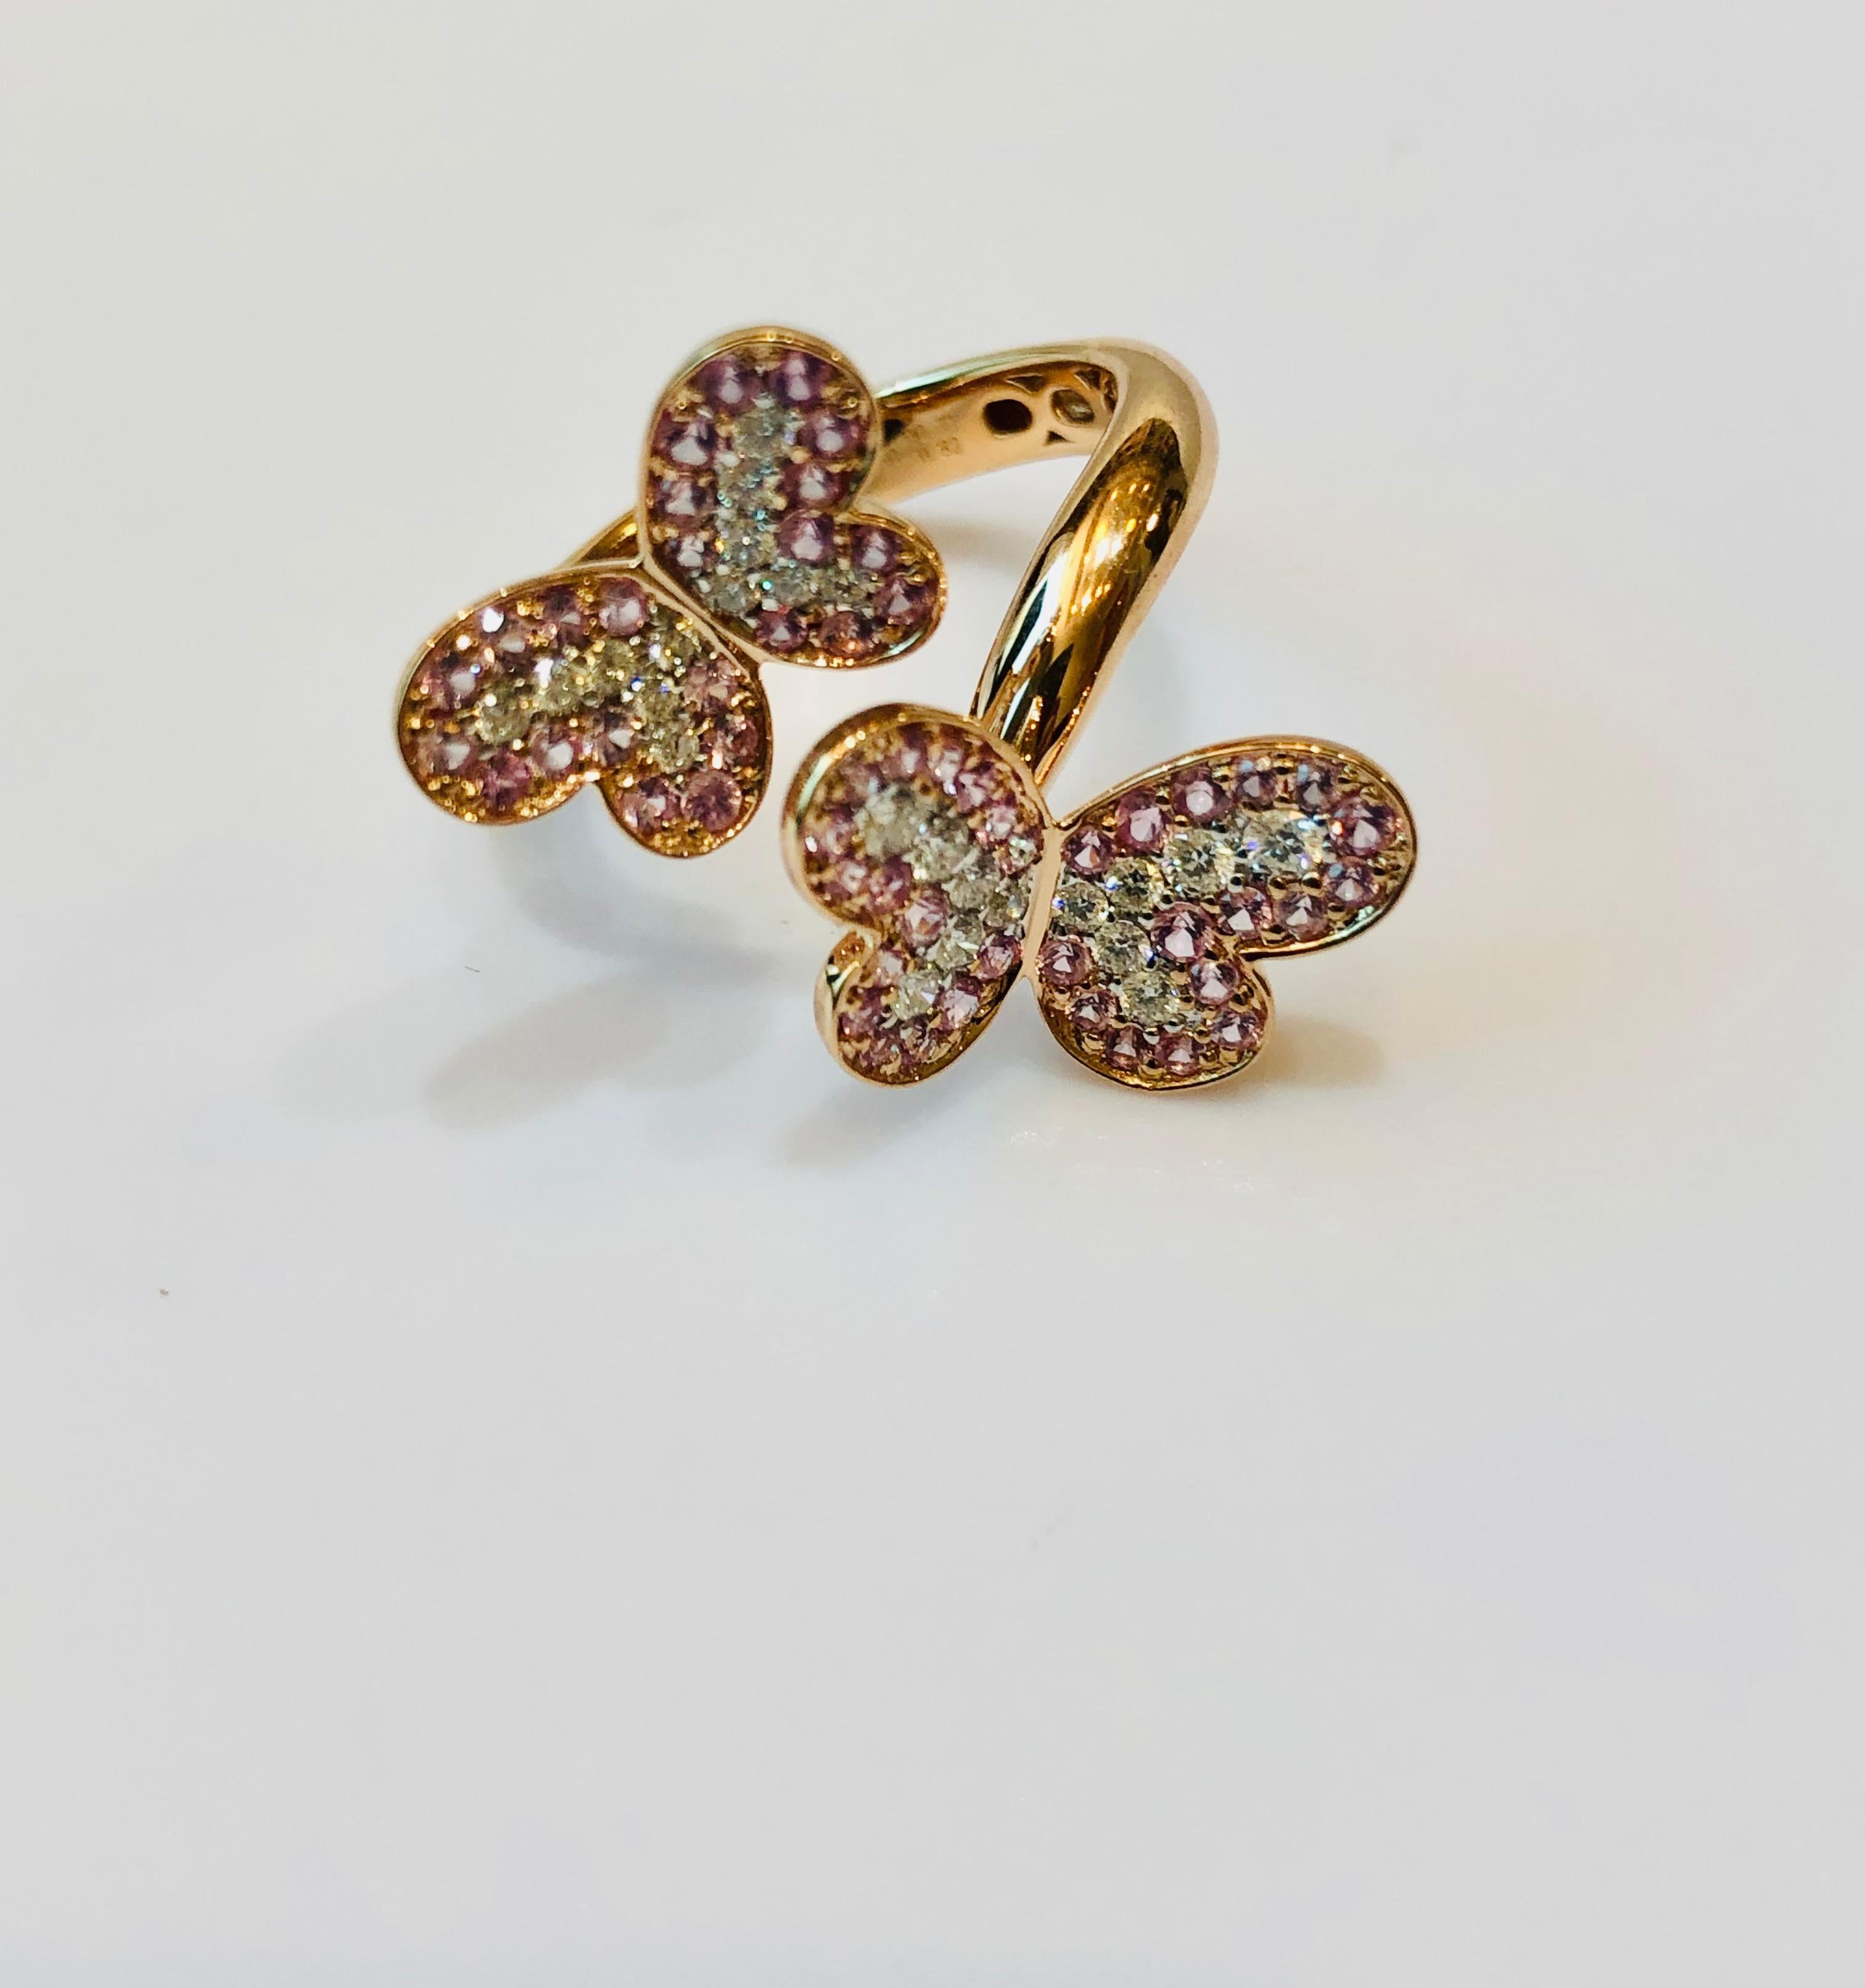 Butterfly diamond and pink saphires in 18k Yellow Gold Ring
56 saphires  1.07cts
24 diamonds  0.34cts 
Size 53 europe 6.5 US

Butterfly Heart Collection with matching earring and necklace pendant
Request availability and finishes and production time